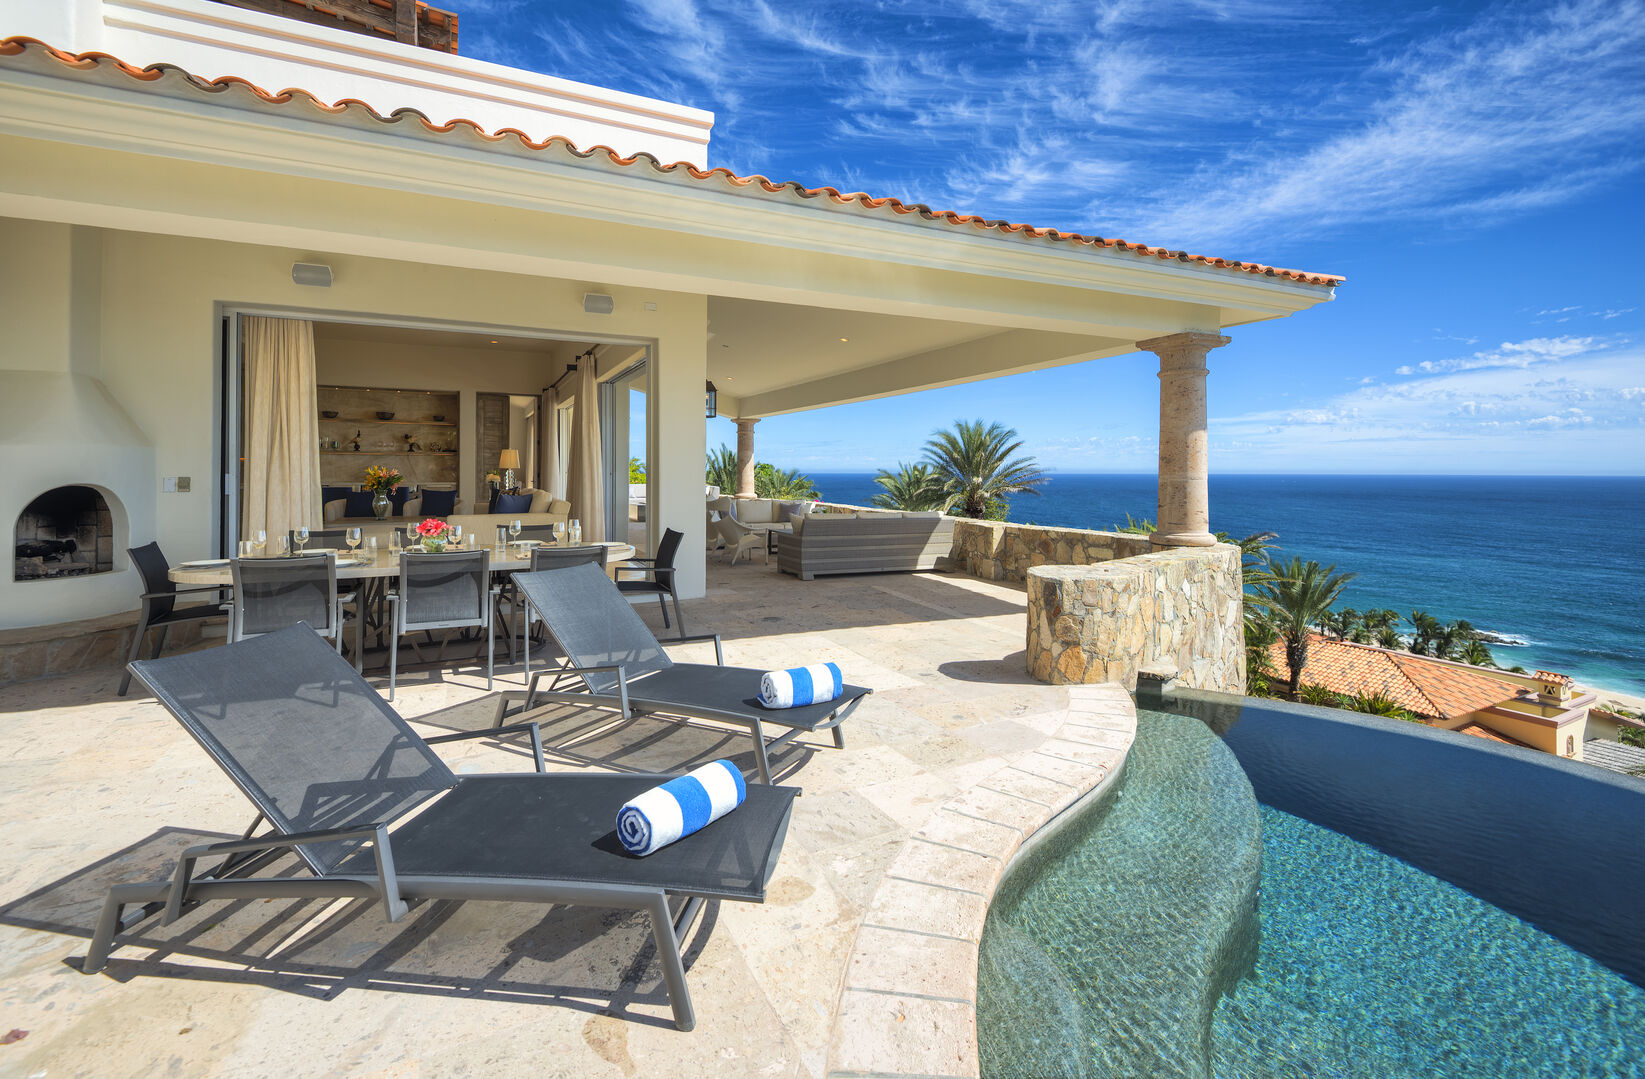 Pool with ocean views outside of this villa located in Los Cabos